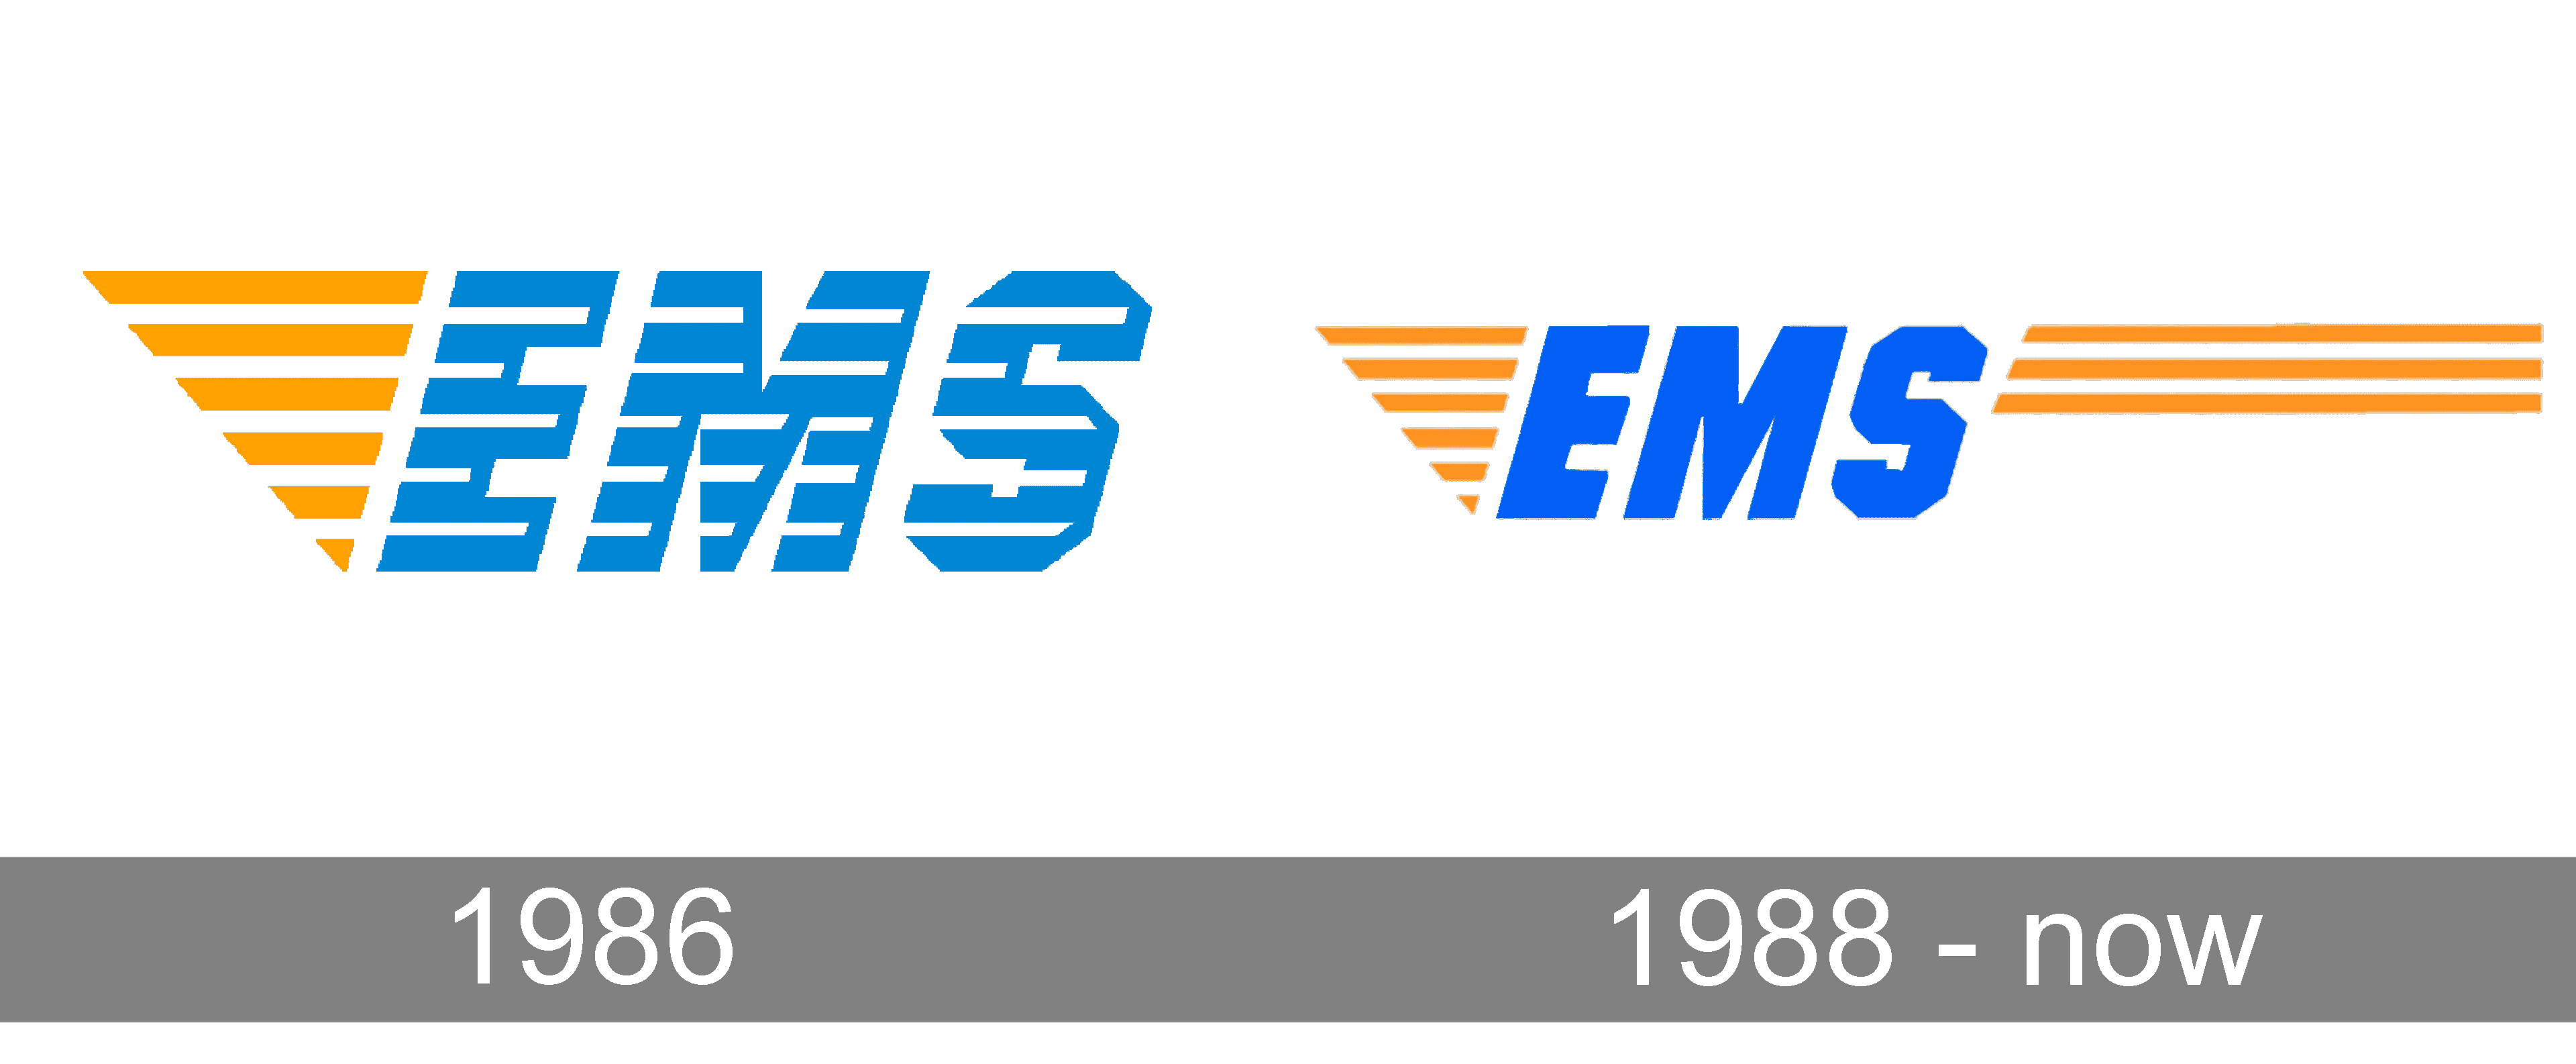 EMS logo and symbol, meaning, history, PNG